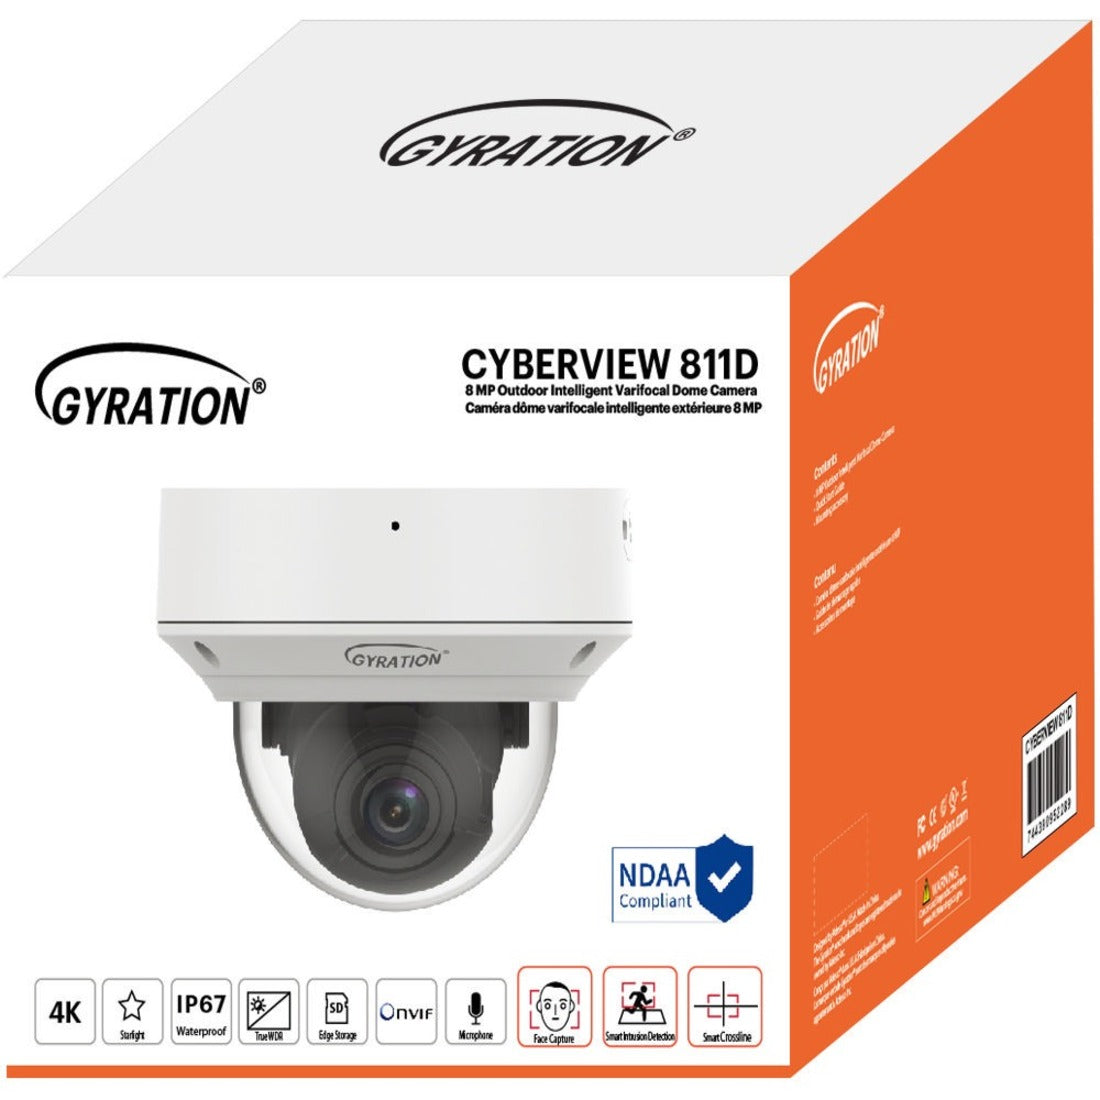 Gyration CYBERVIEW 811D 8 MP Outdoor Intelligent Varifocal Dome Camera, 4.3x Optical Zoom, 3840 x 2160 Video Resolution, Memory Card Storage